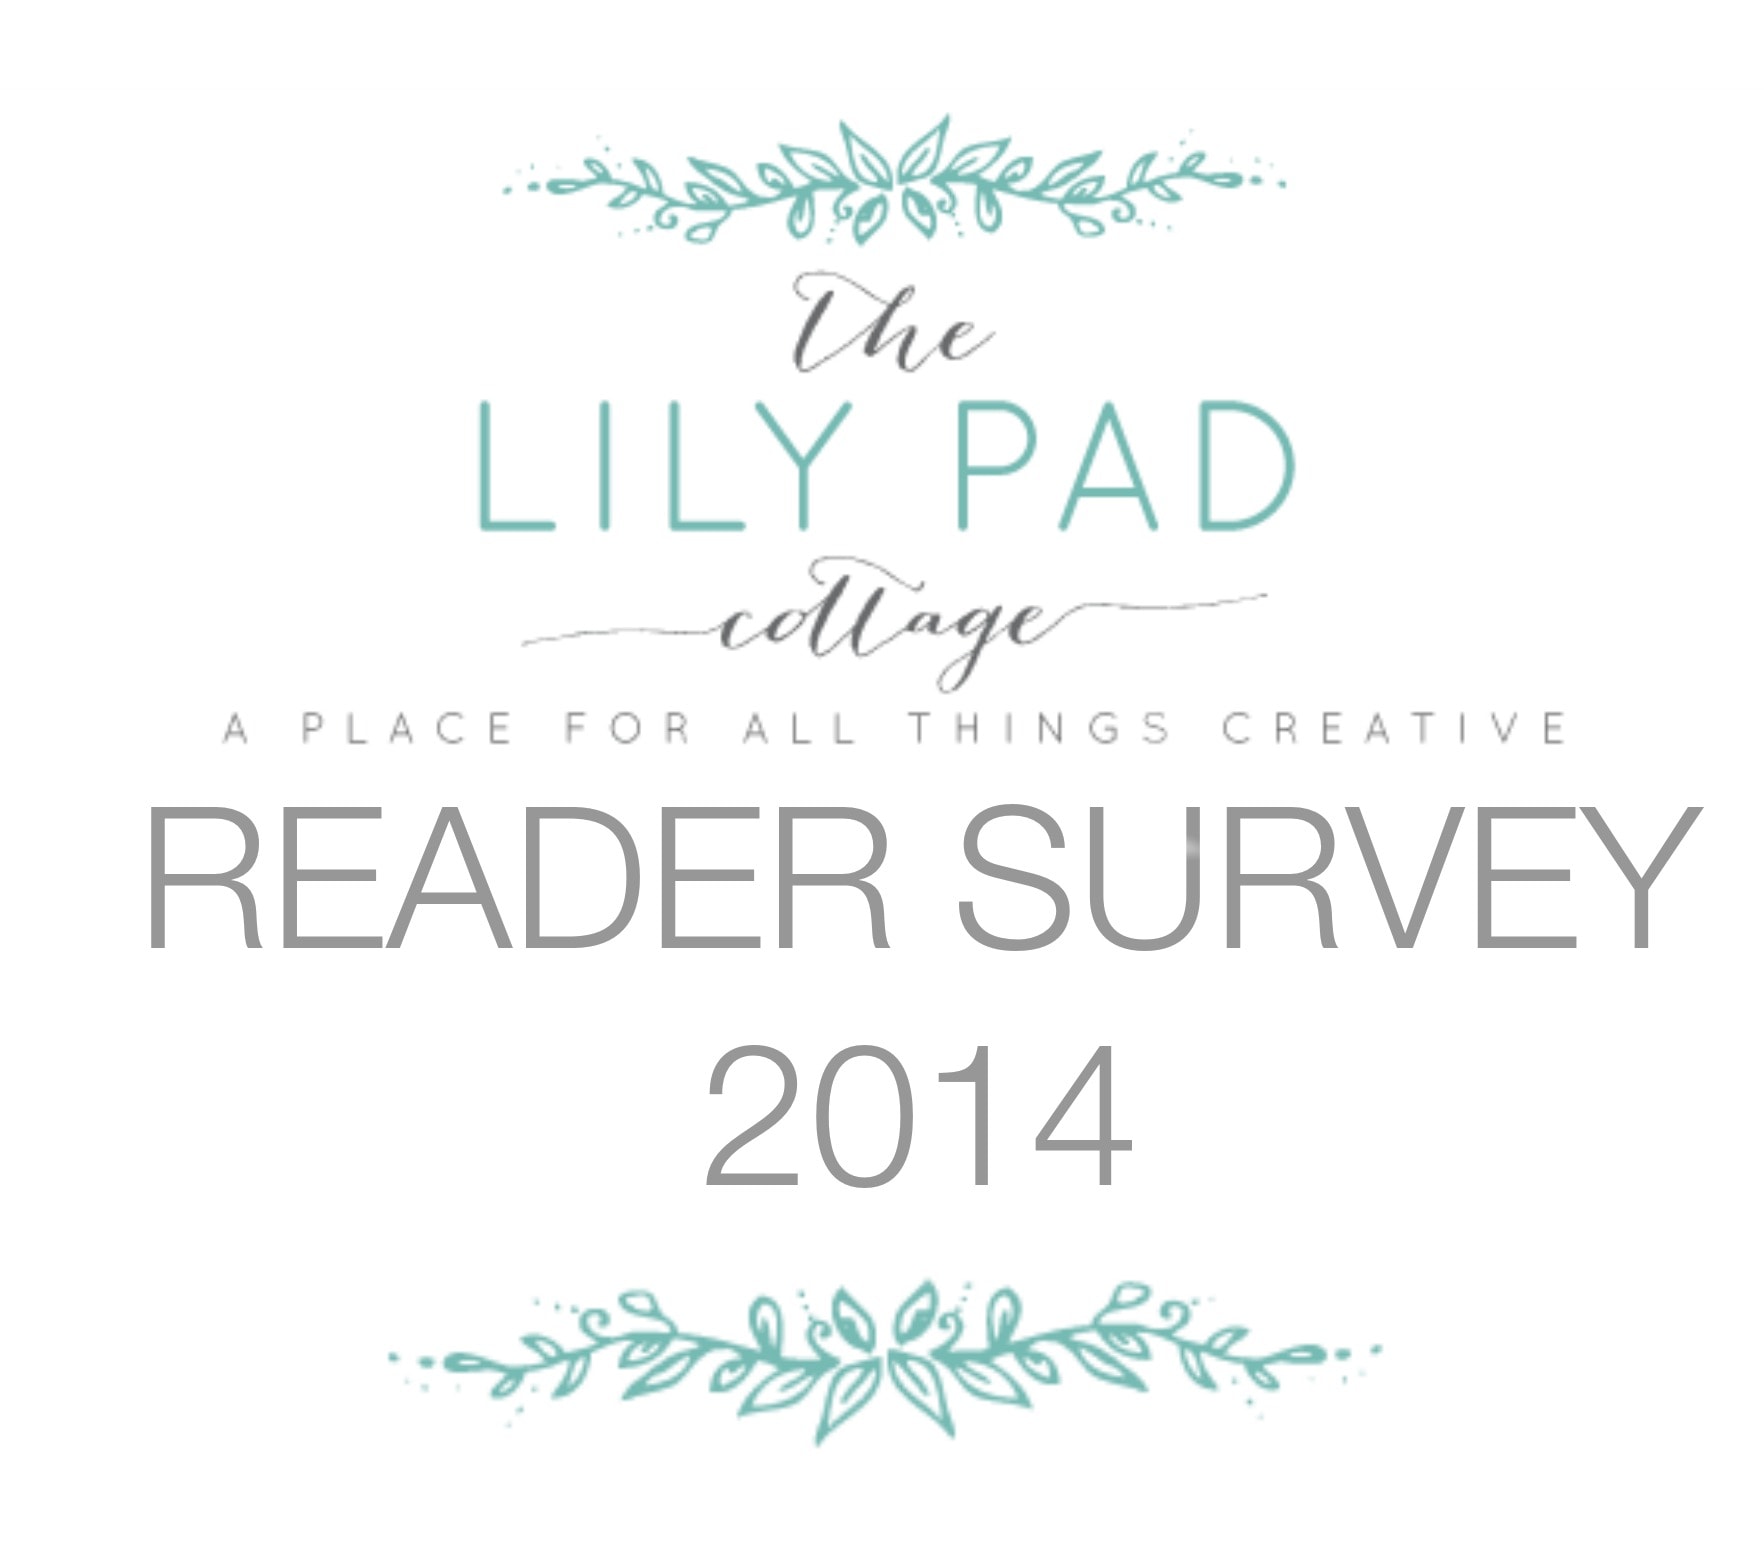 Reader Survey – tell me what you think!